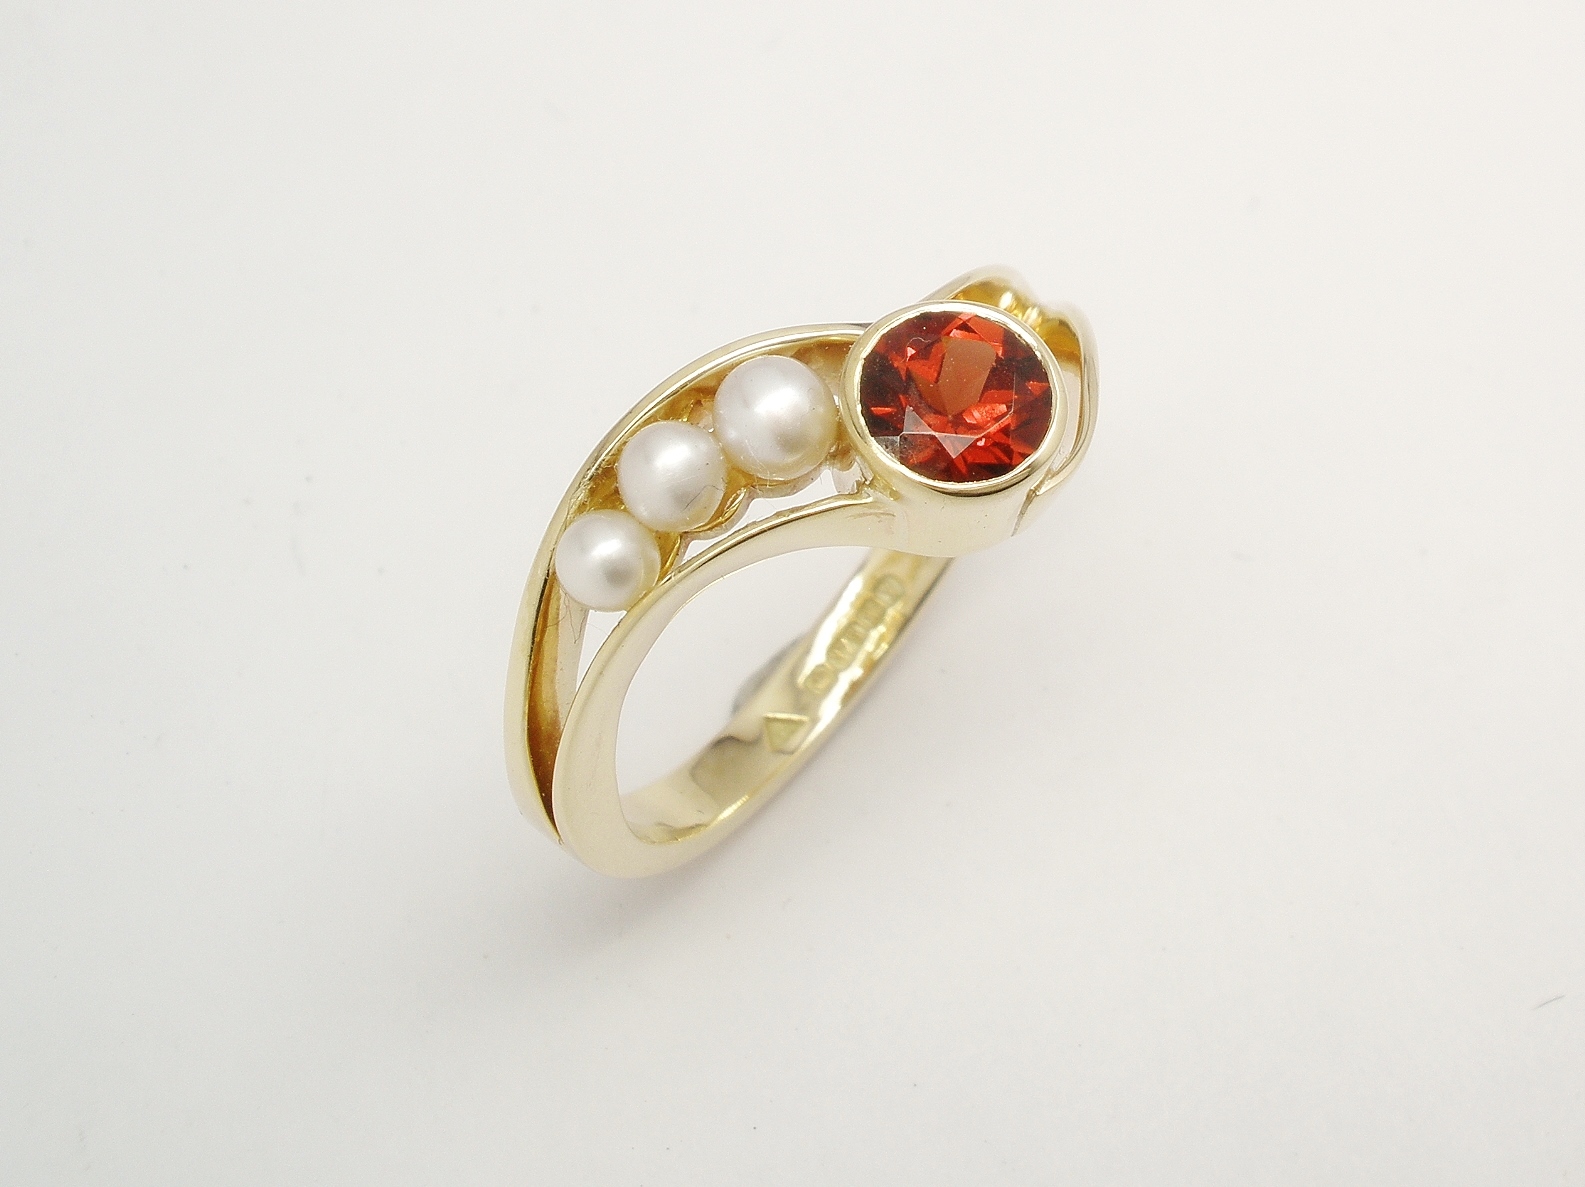 A 4 stone round garnet and pearl 'wishbone' style ring mounted in 9ct. yellow gold.